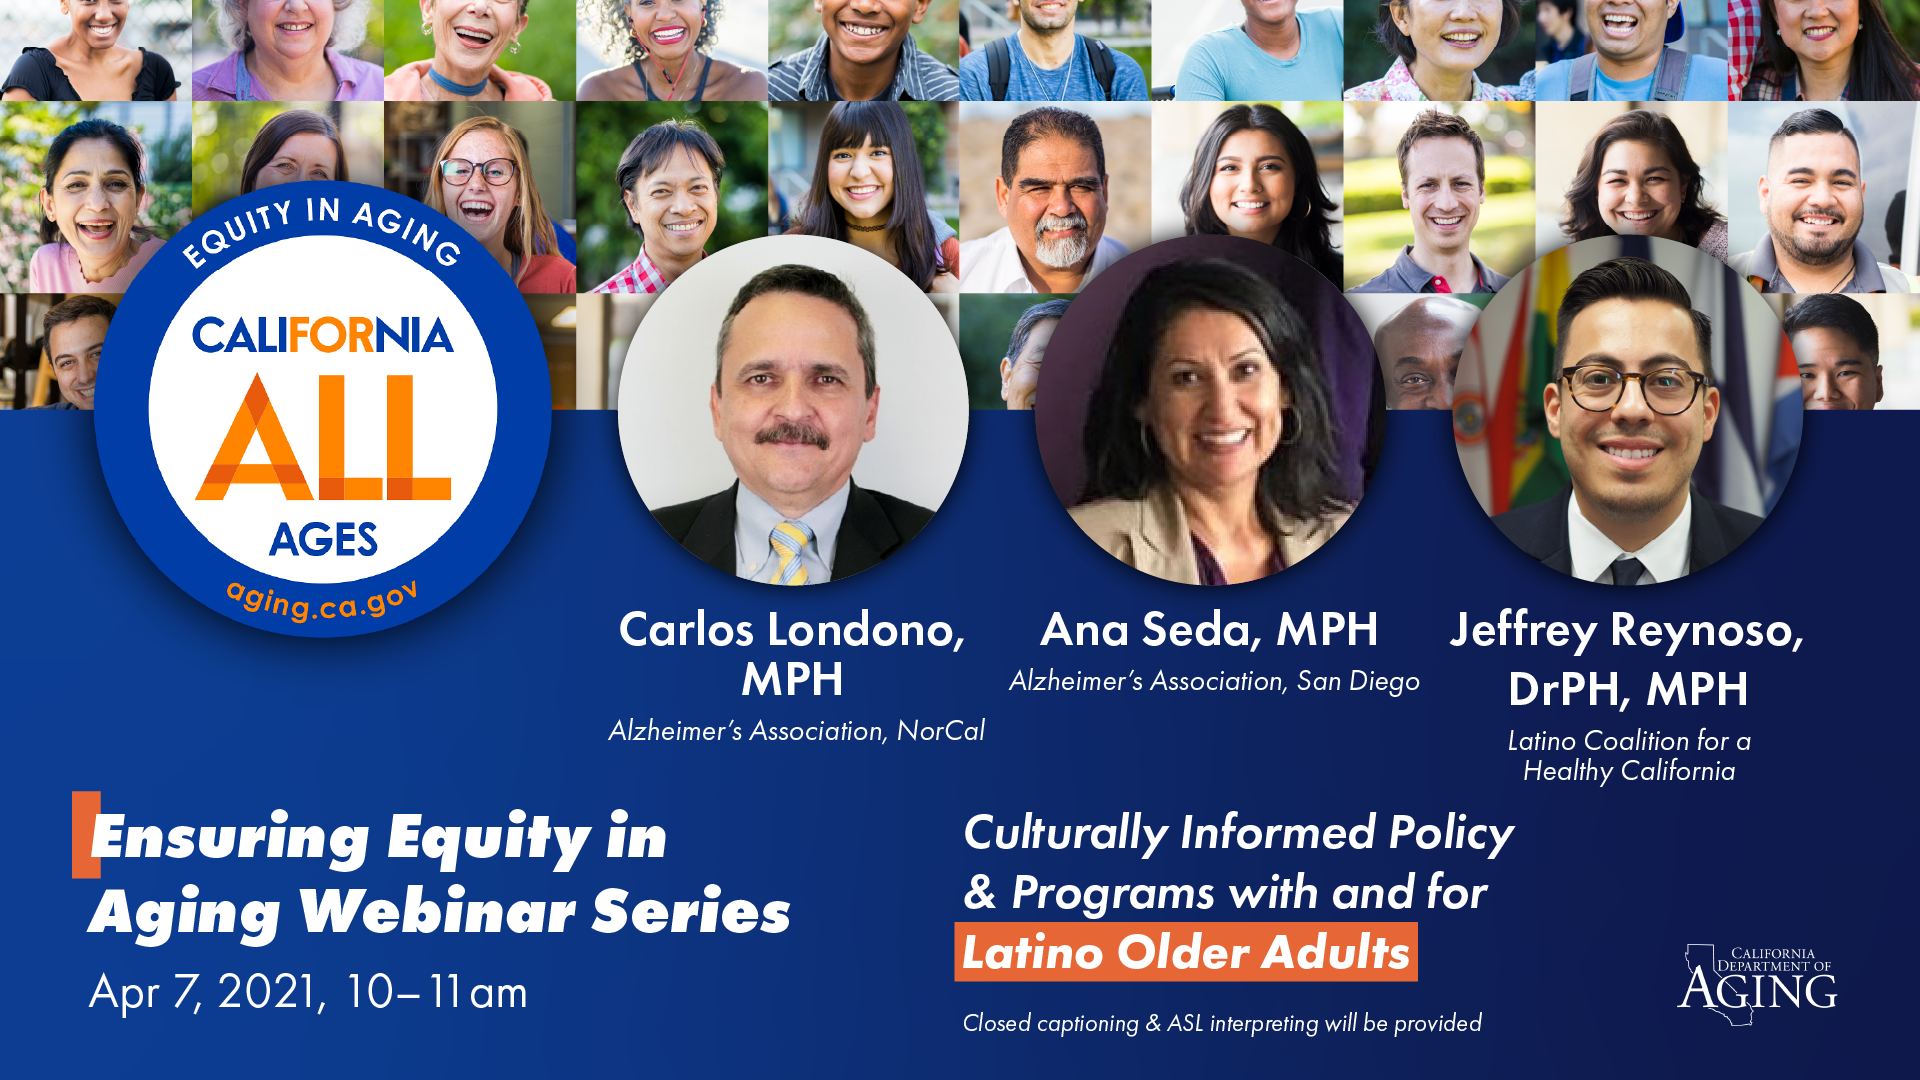 April 7th, CDA will host our sixth Ensuring Equity in Aging webinar: Culturally Informed Policy & Programs with and for Latino Older Adults. Webinar features Carlos Londono (Alzheimer's Association - Northern California and Northern Nevada), Ana Seda (Alzheimer's Association San Diego/Imperial Chapter), and Jeffrey Reynoso (Latino Coalition for a Healthy California).